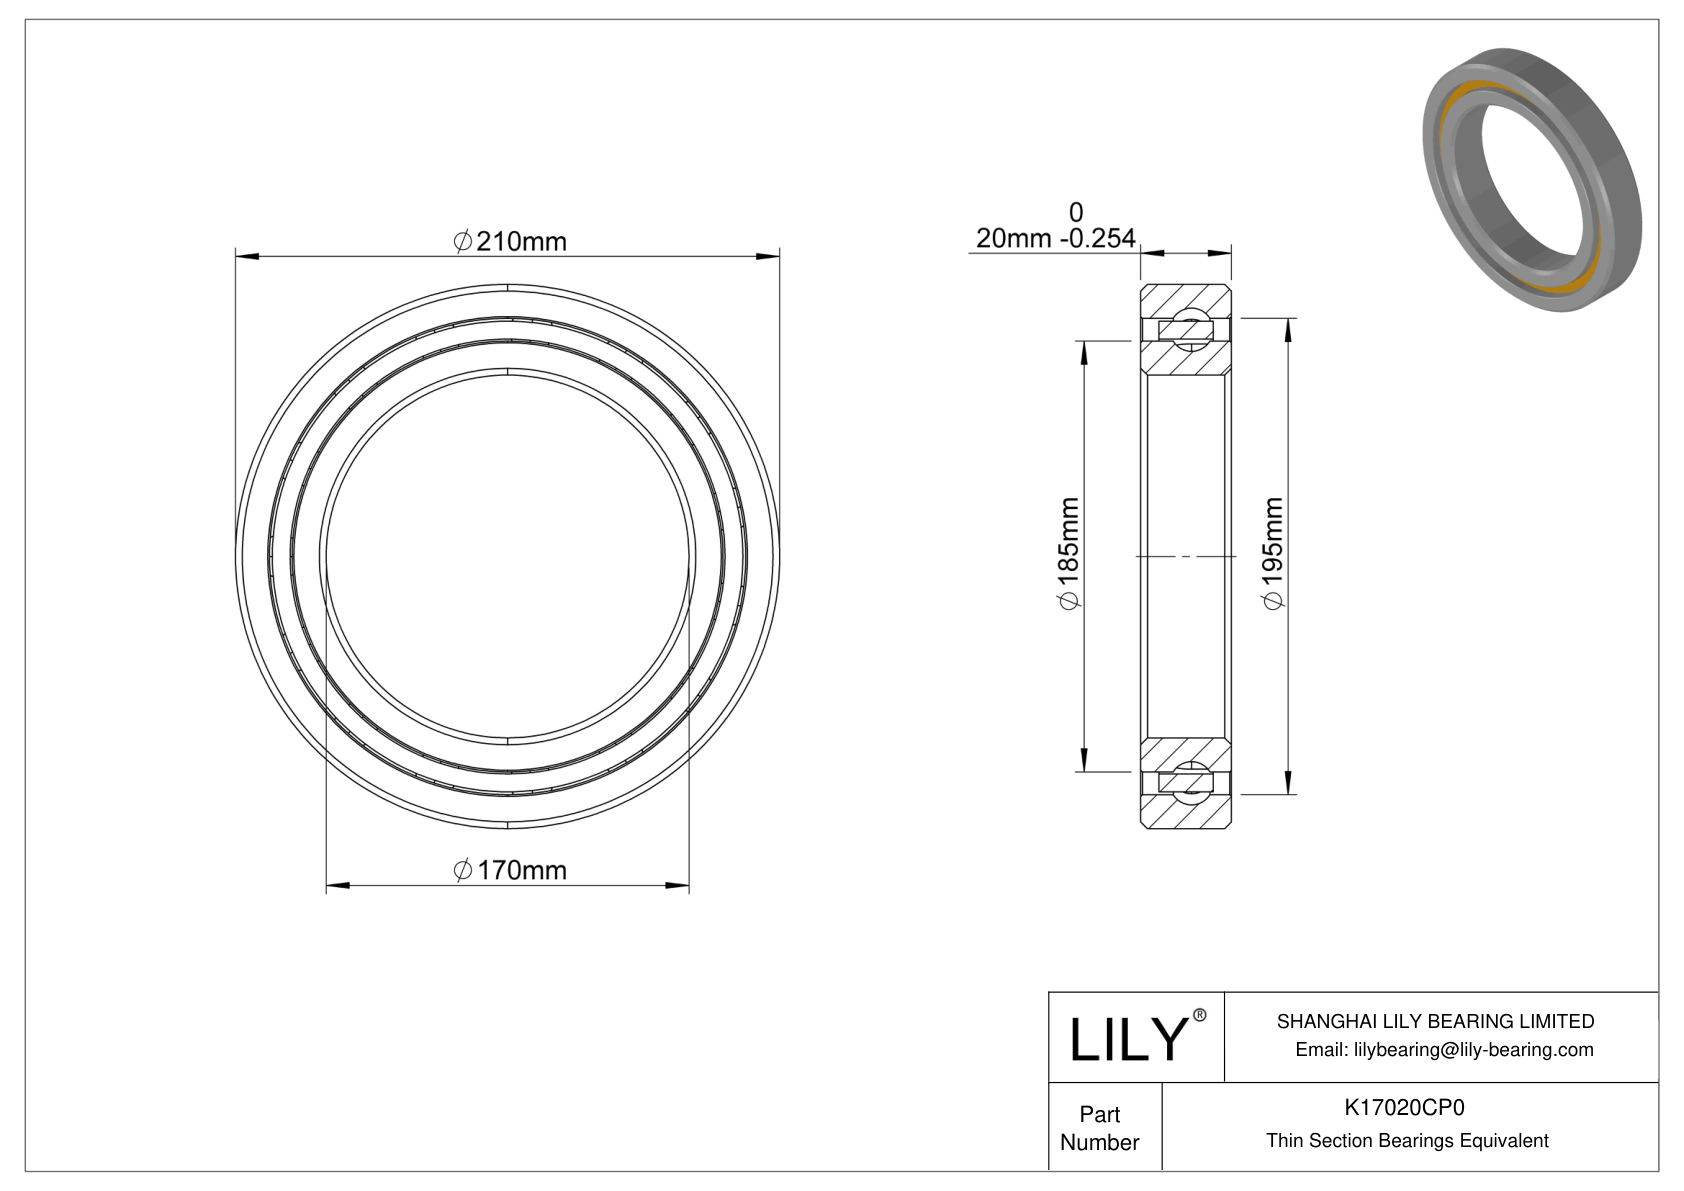 K17020CP0 Constant Section (CS) Bearings cad drawing